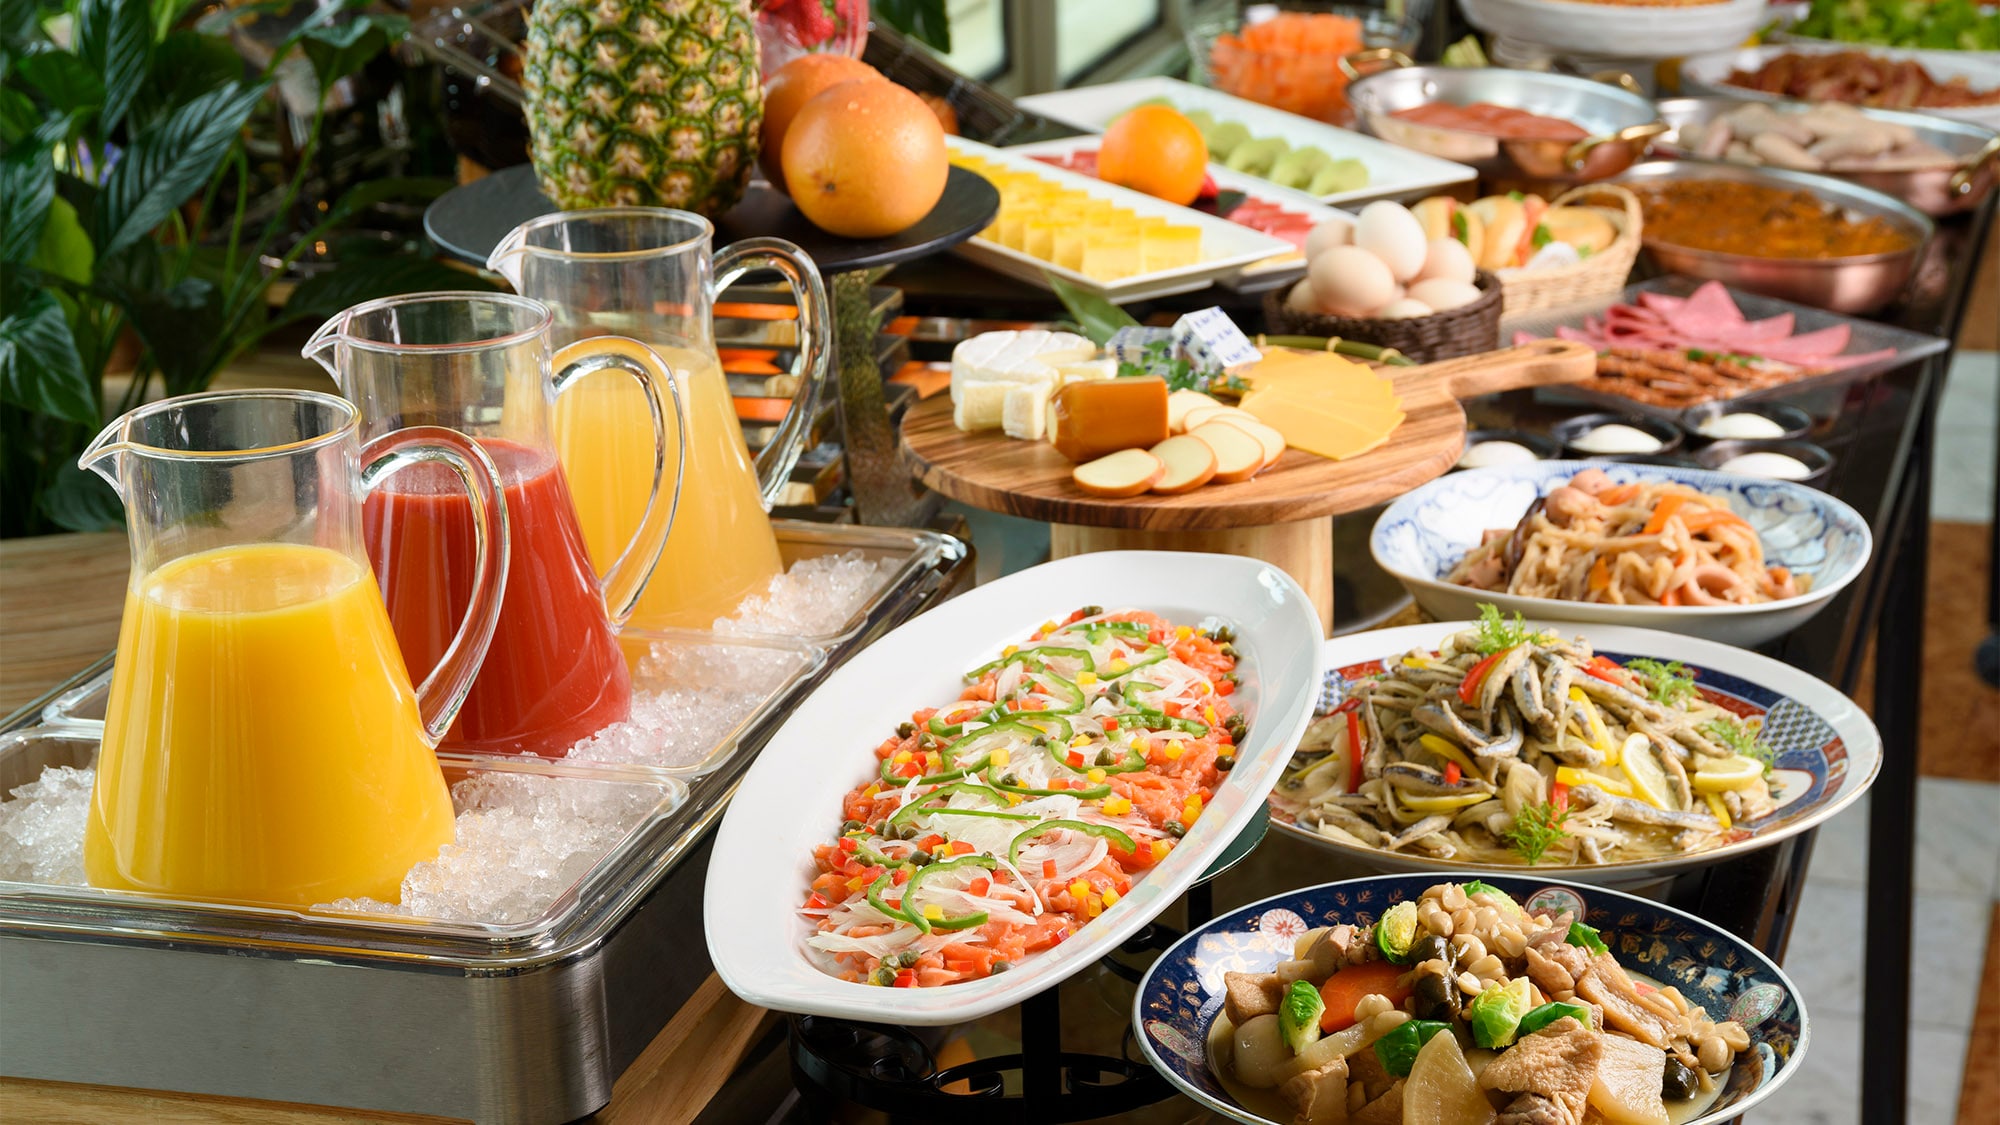 [Breakfast] A lineup where you can enjoy both Japanese and Western dishes, with a focus on "choice"